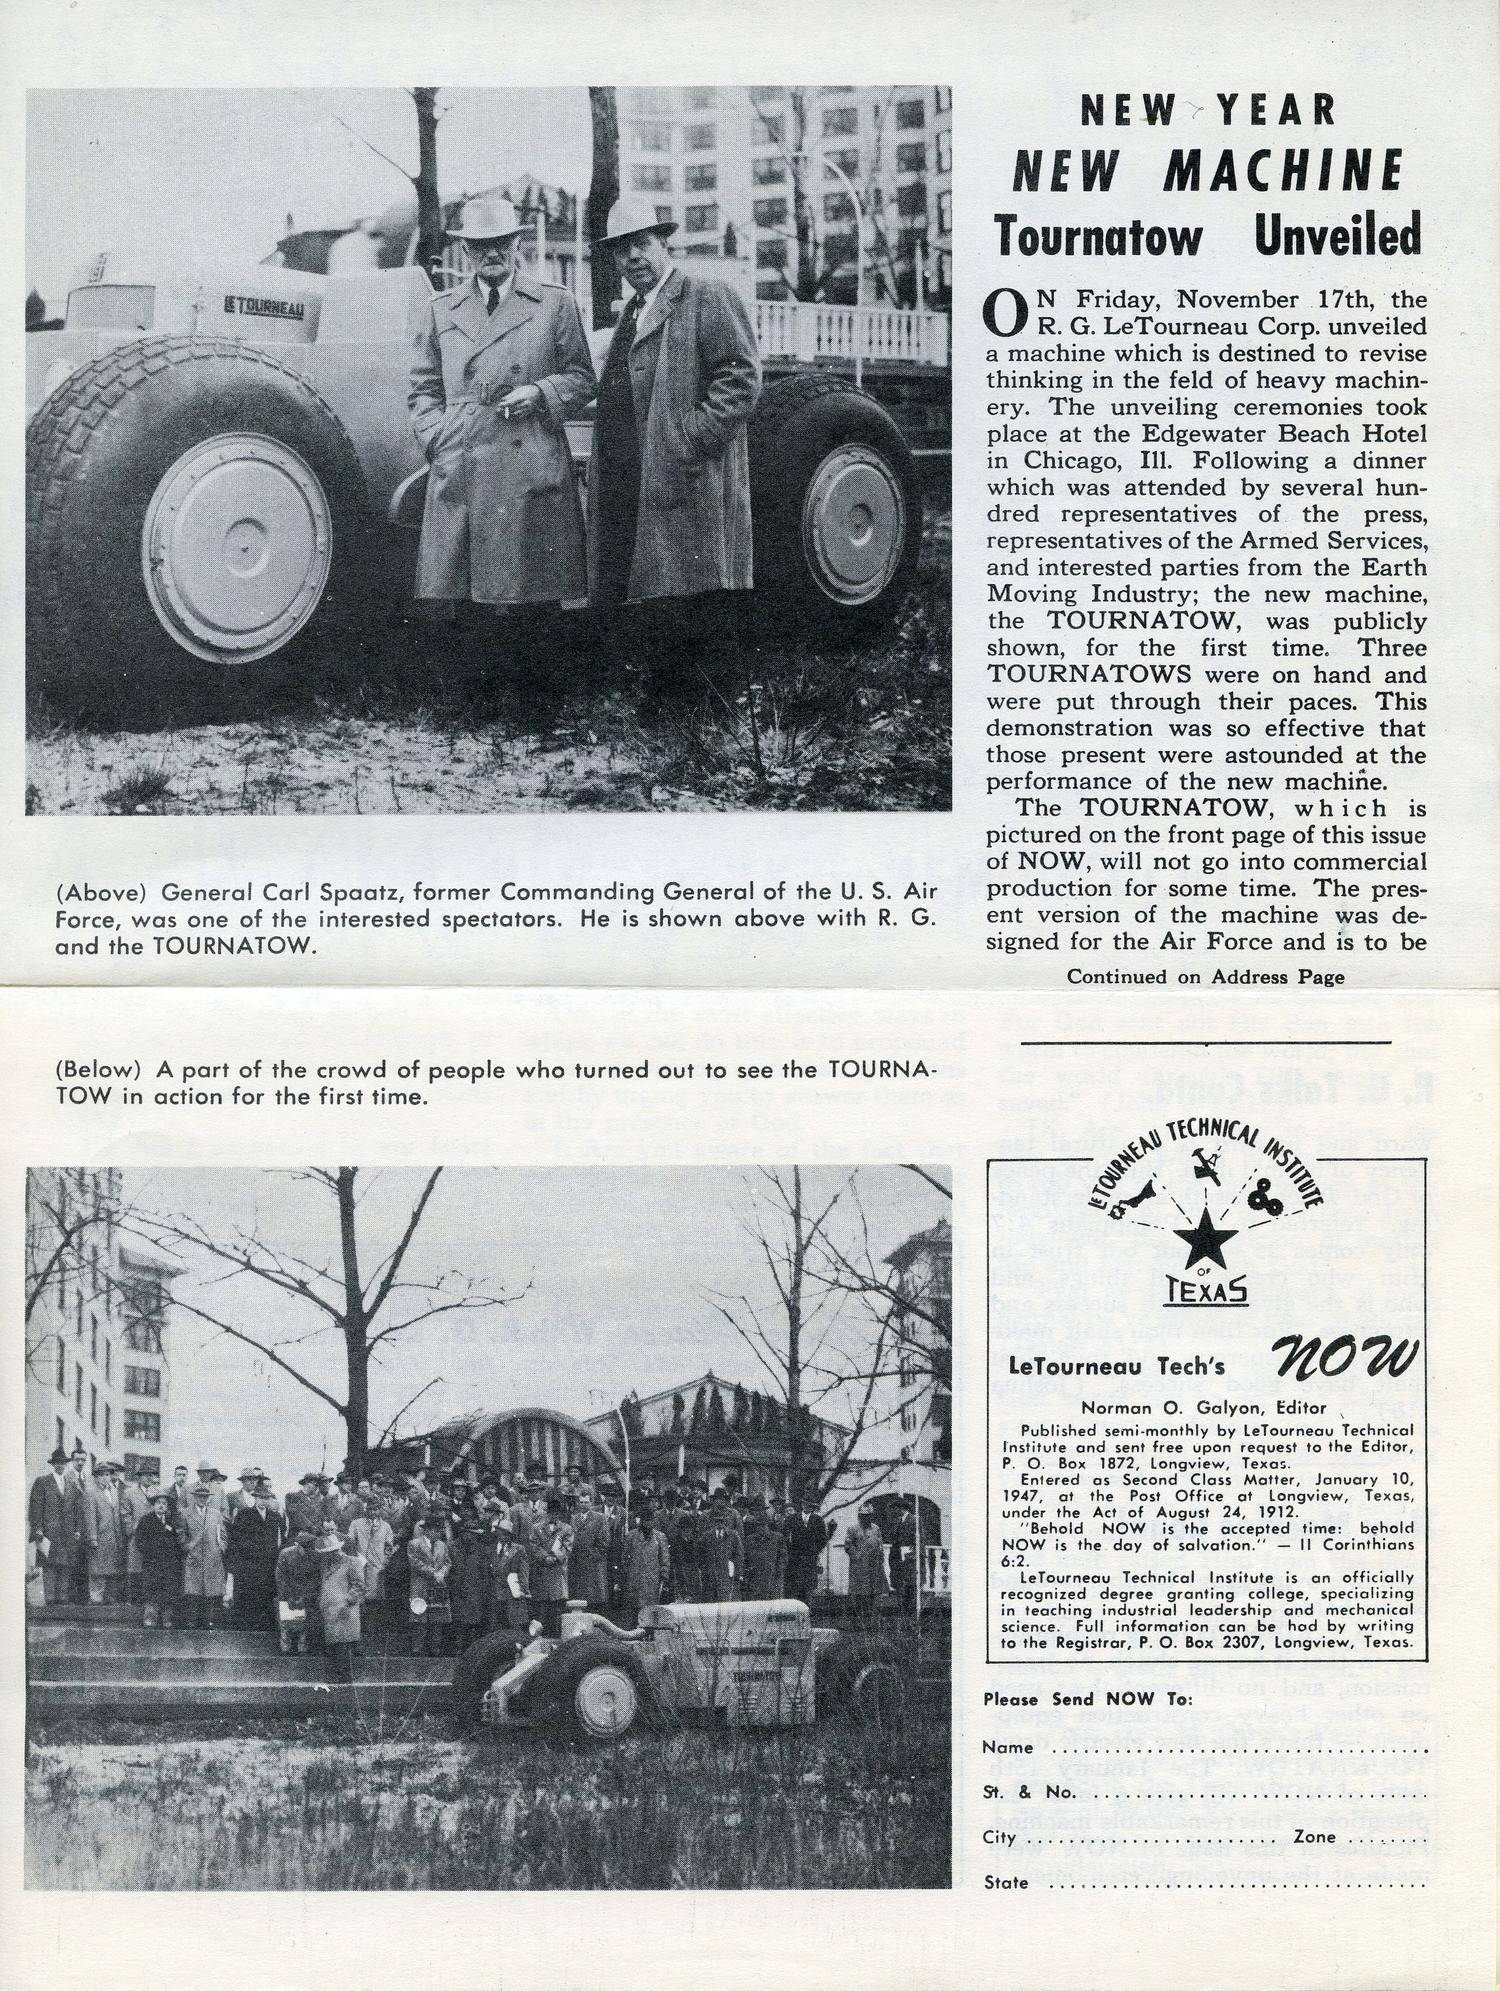 LeTourneau Tech's NOW, Volume 5, Number 1, January 1, 1951
                                                
                                                    4
                                                